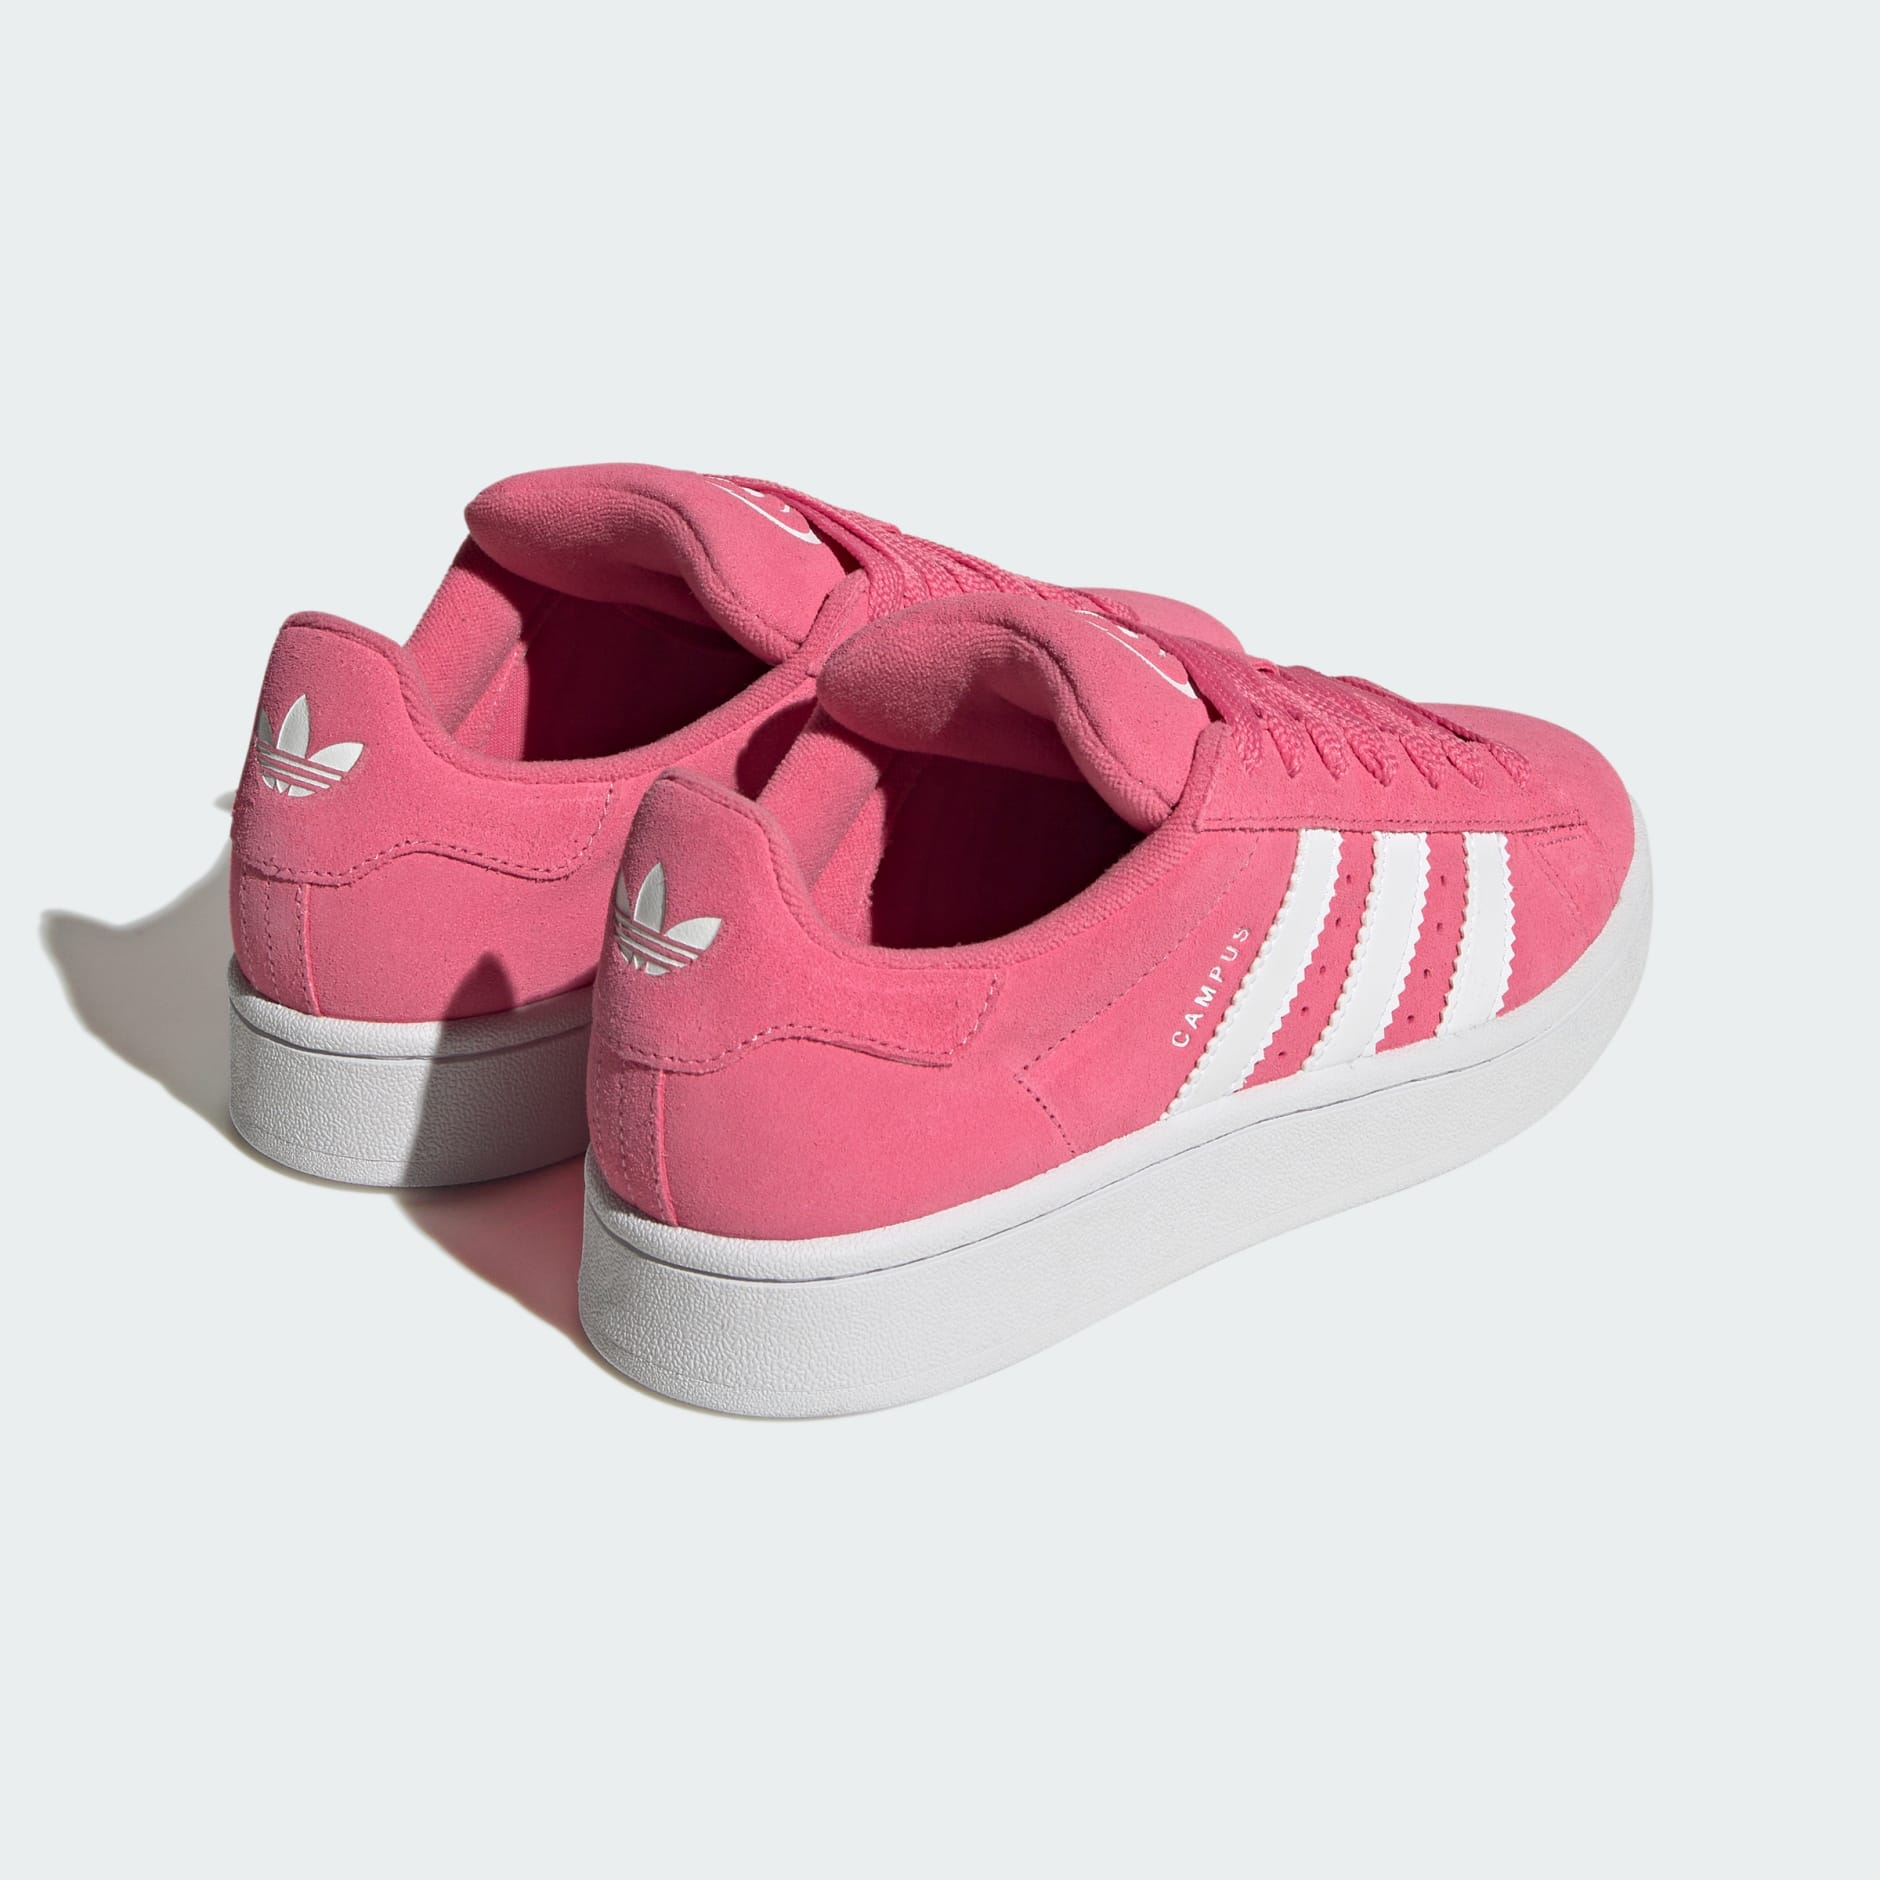 Women\'s Shoes - Campus 00s Oman Pink adidas Shoes - 